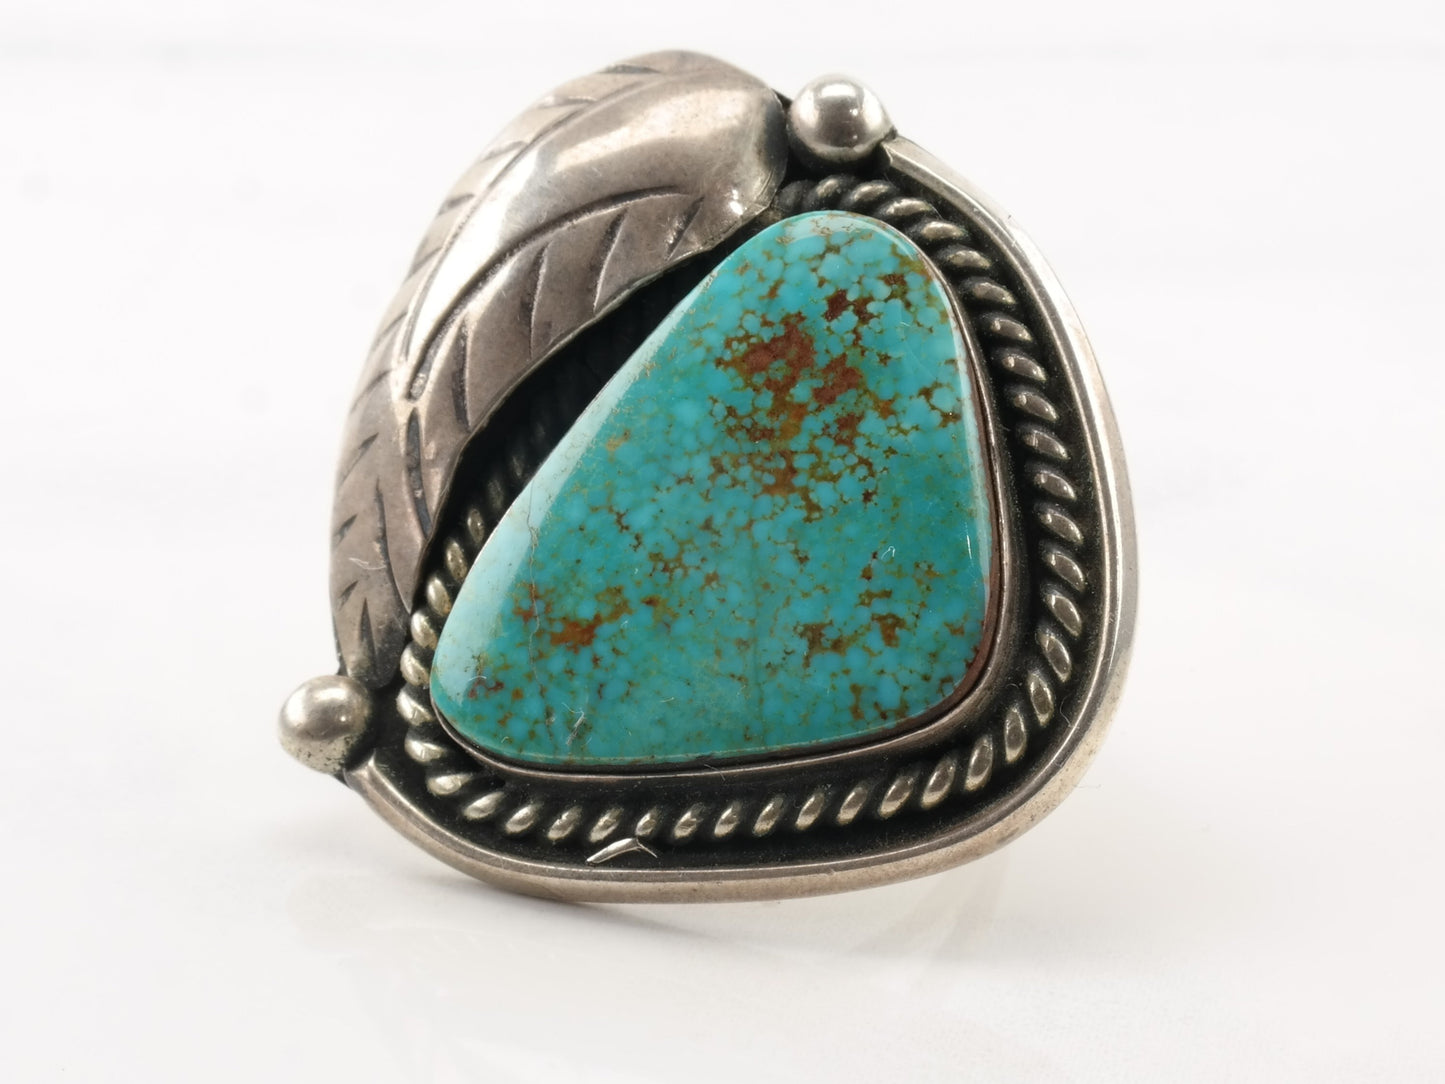 Vintage Sterling Silver Ring Spiderweb Turquoise Leaf Size 8